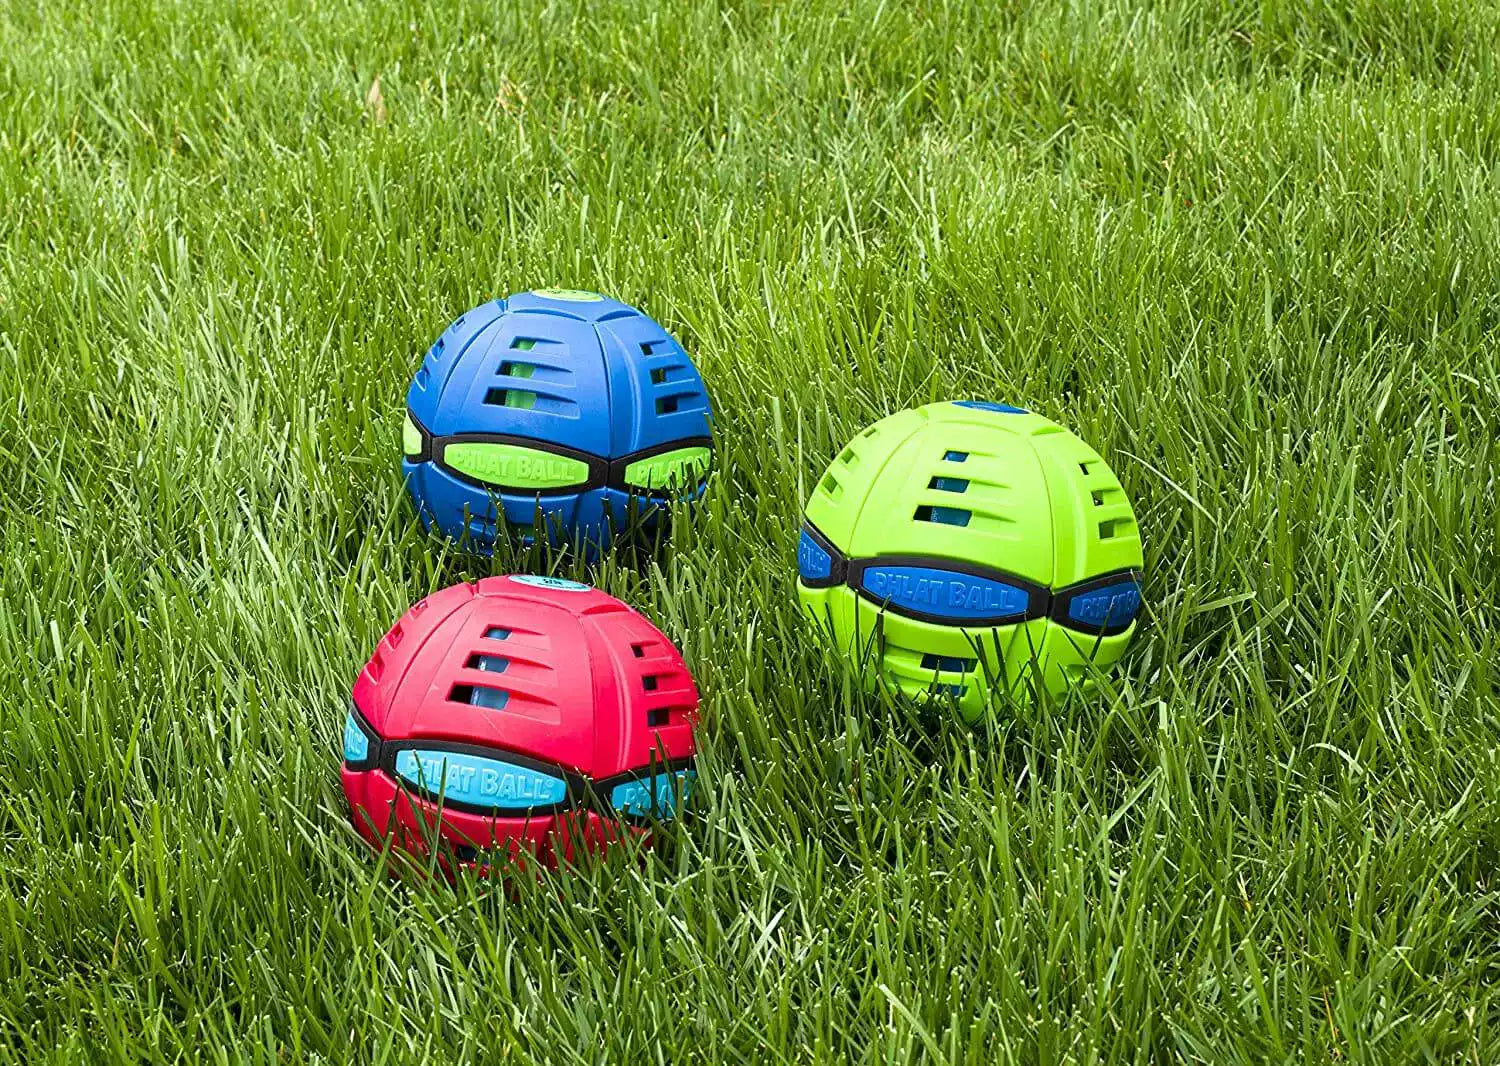 Vivid Golaith toys for children - Wahu Phlat Ball classic assortment - unique transforming toy